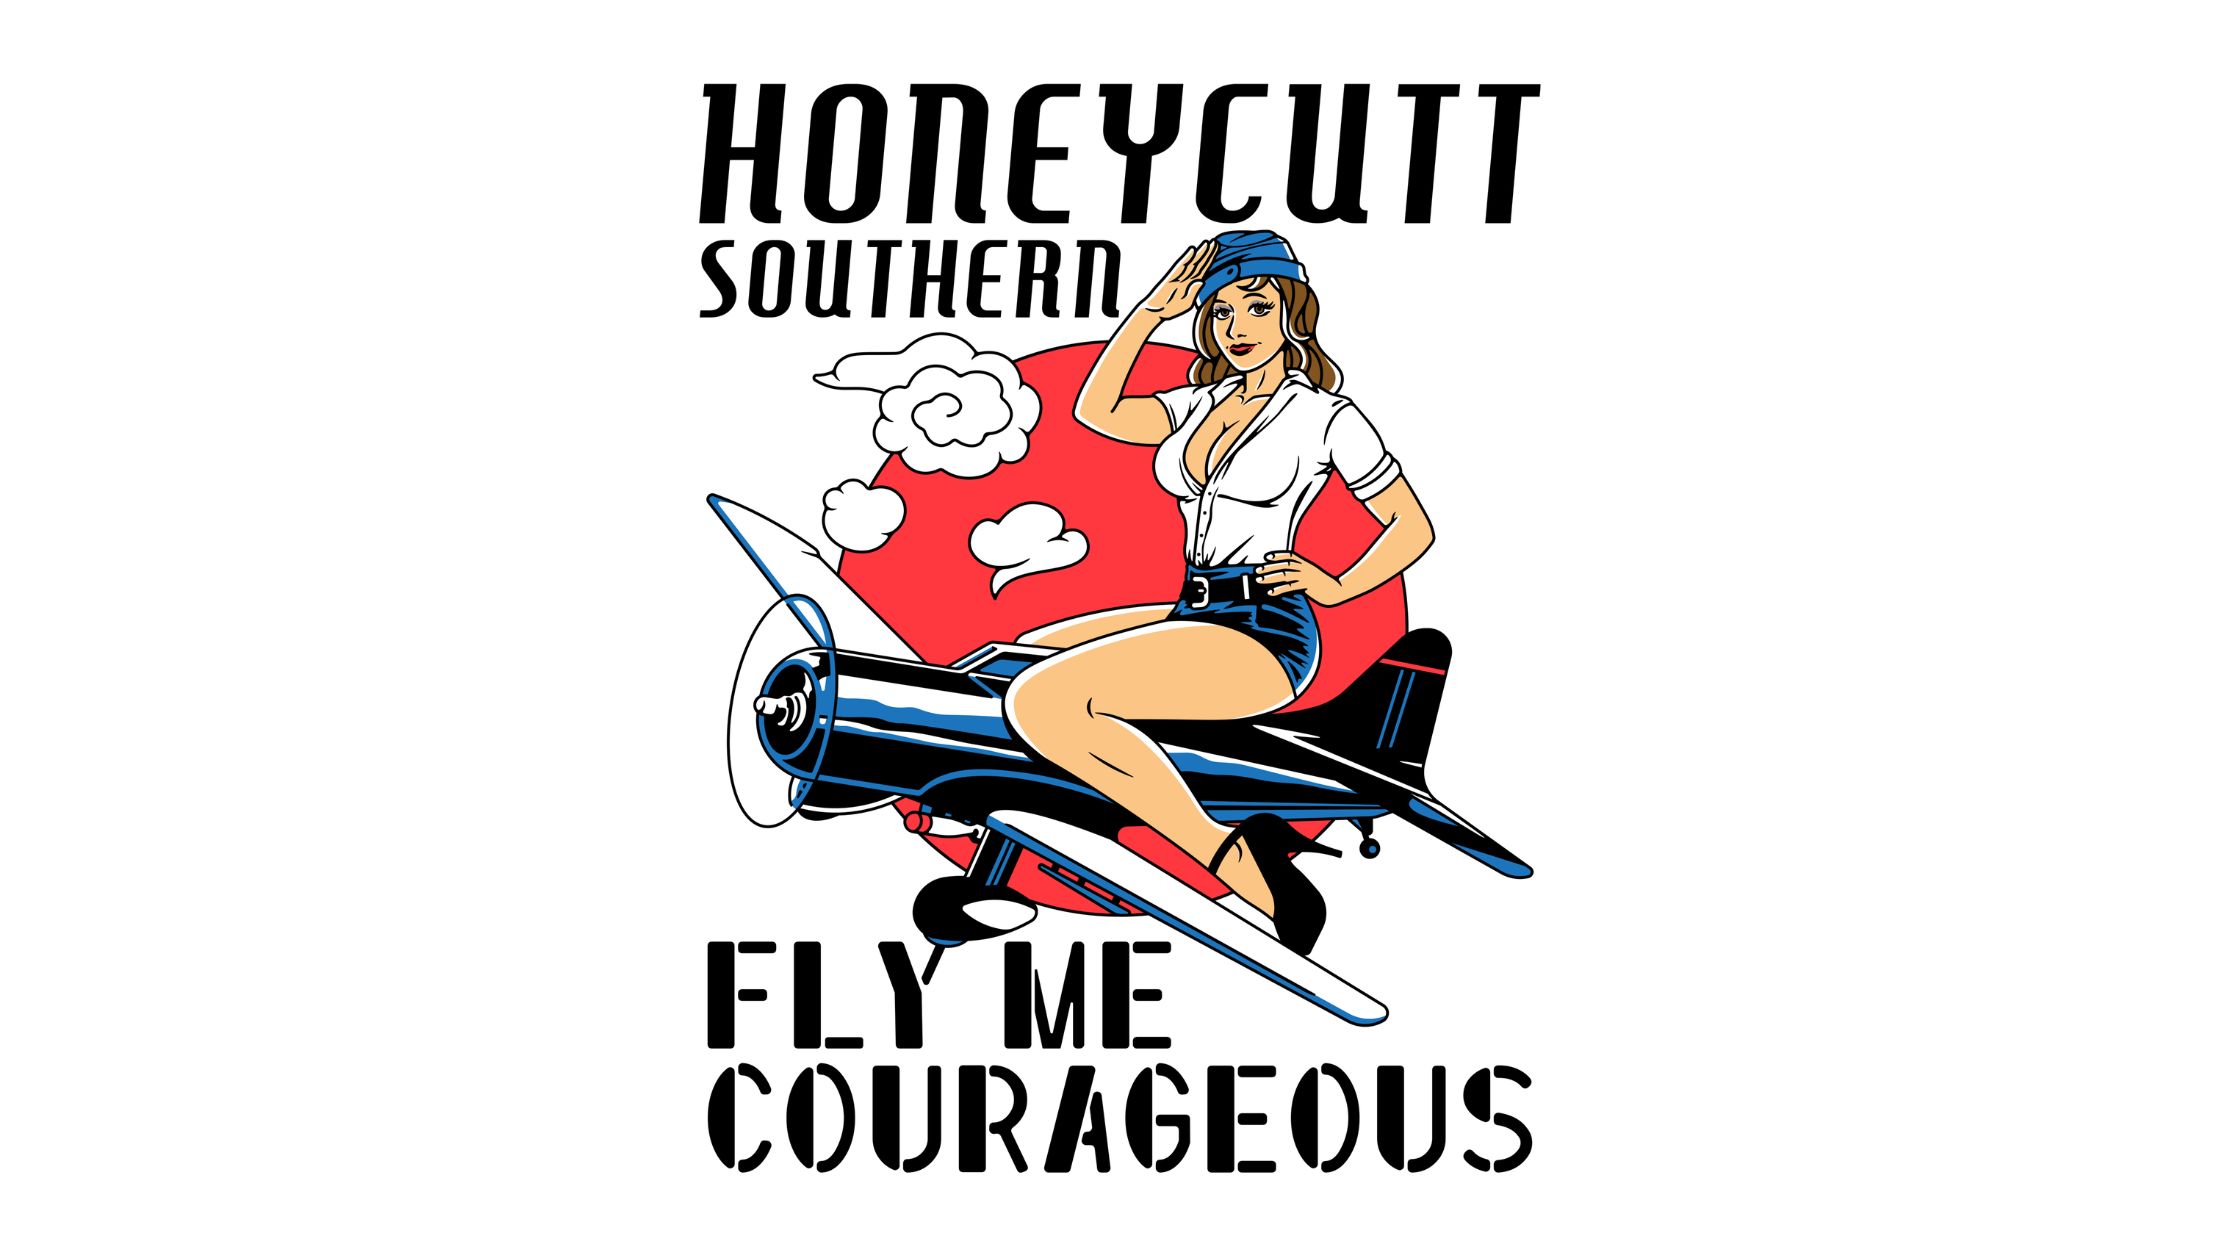 Honeycutt Southern - Fly Me Courageous (Single Artwork)